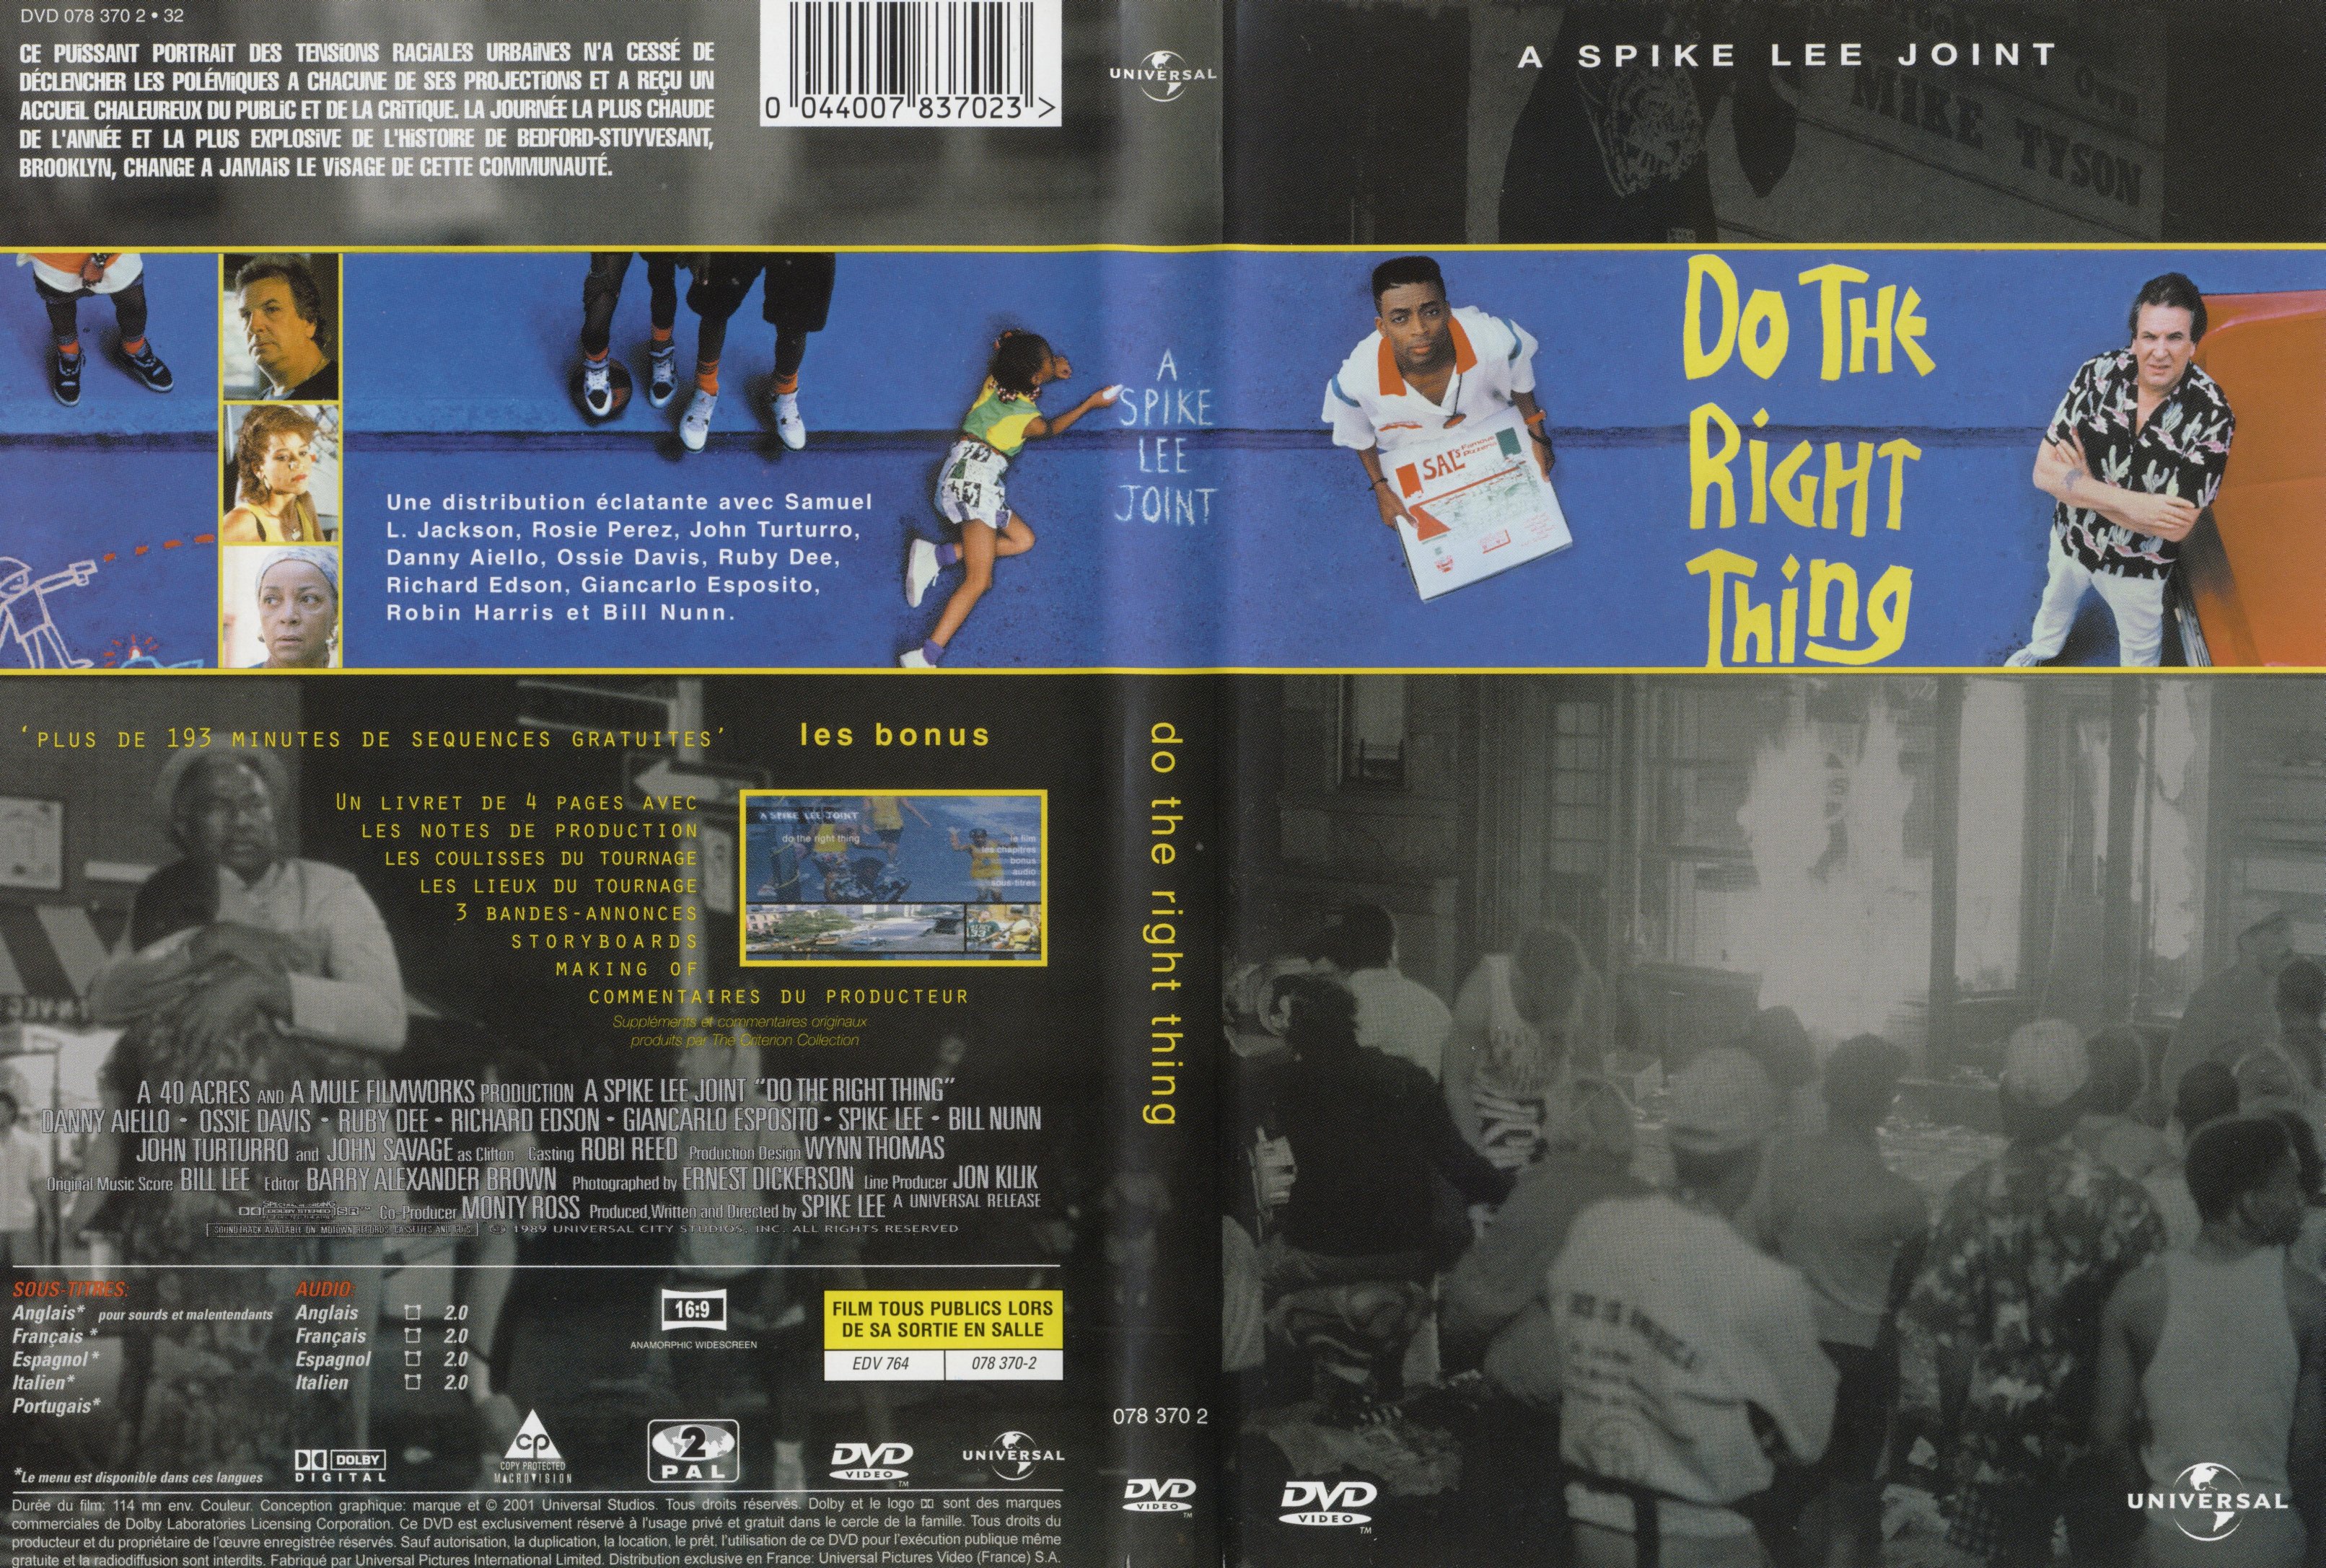 Jaquette DVD Do the right thing